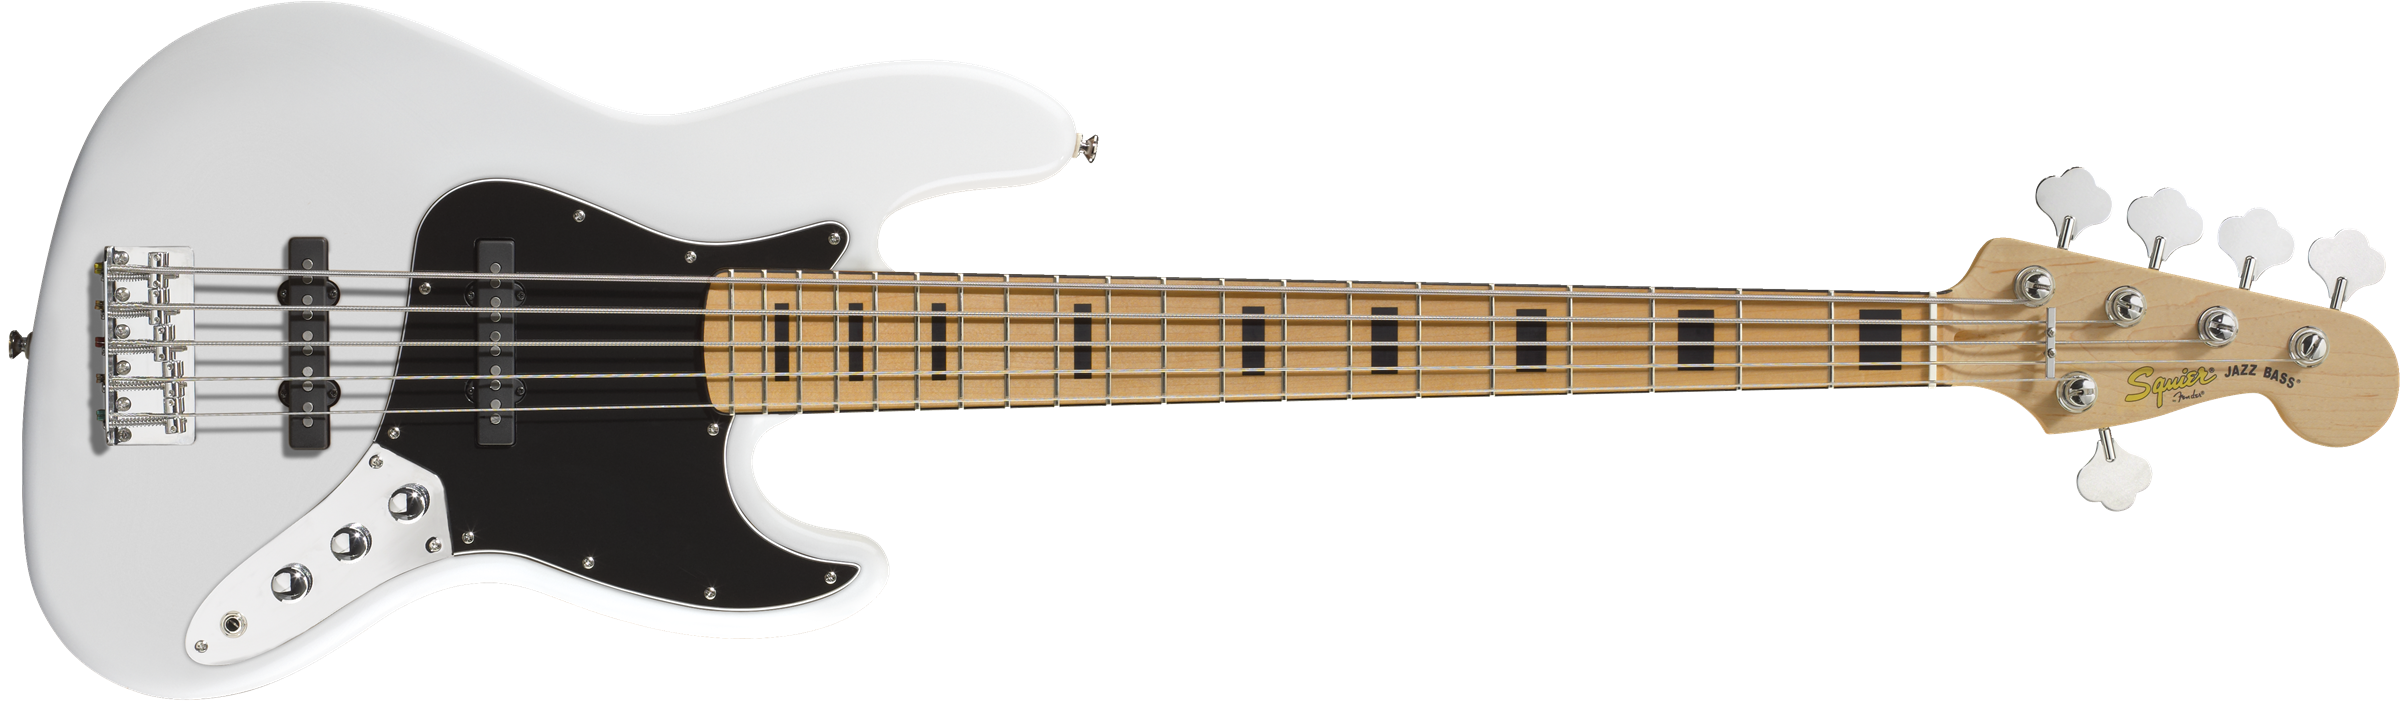 Squier® Vintage Modified Jazz Bass® V, Maple Fingerboard, Olympic White